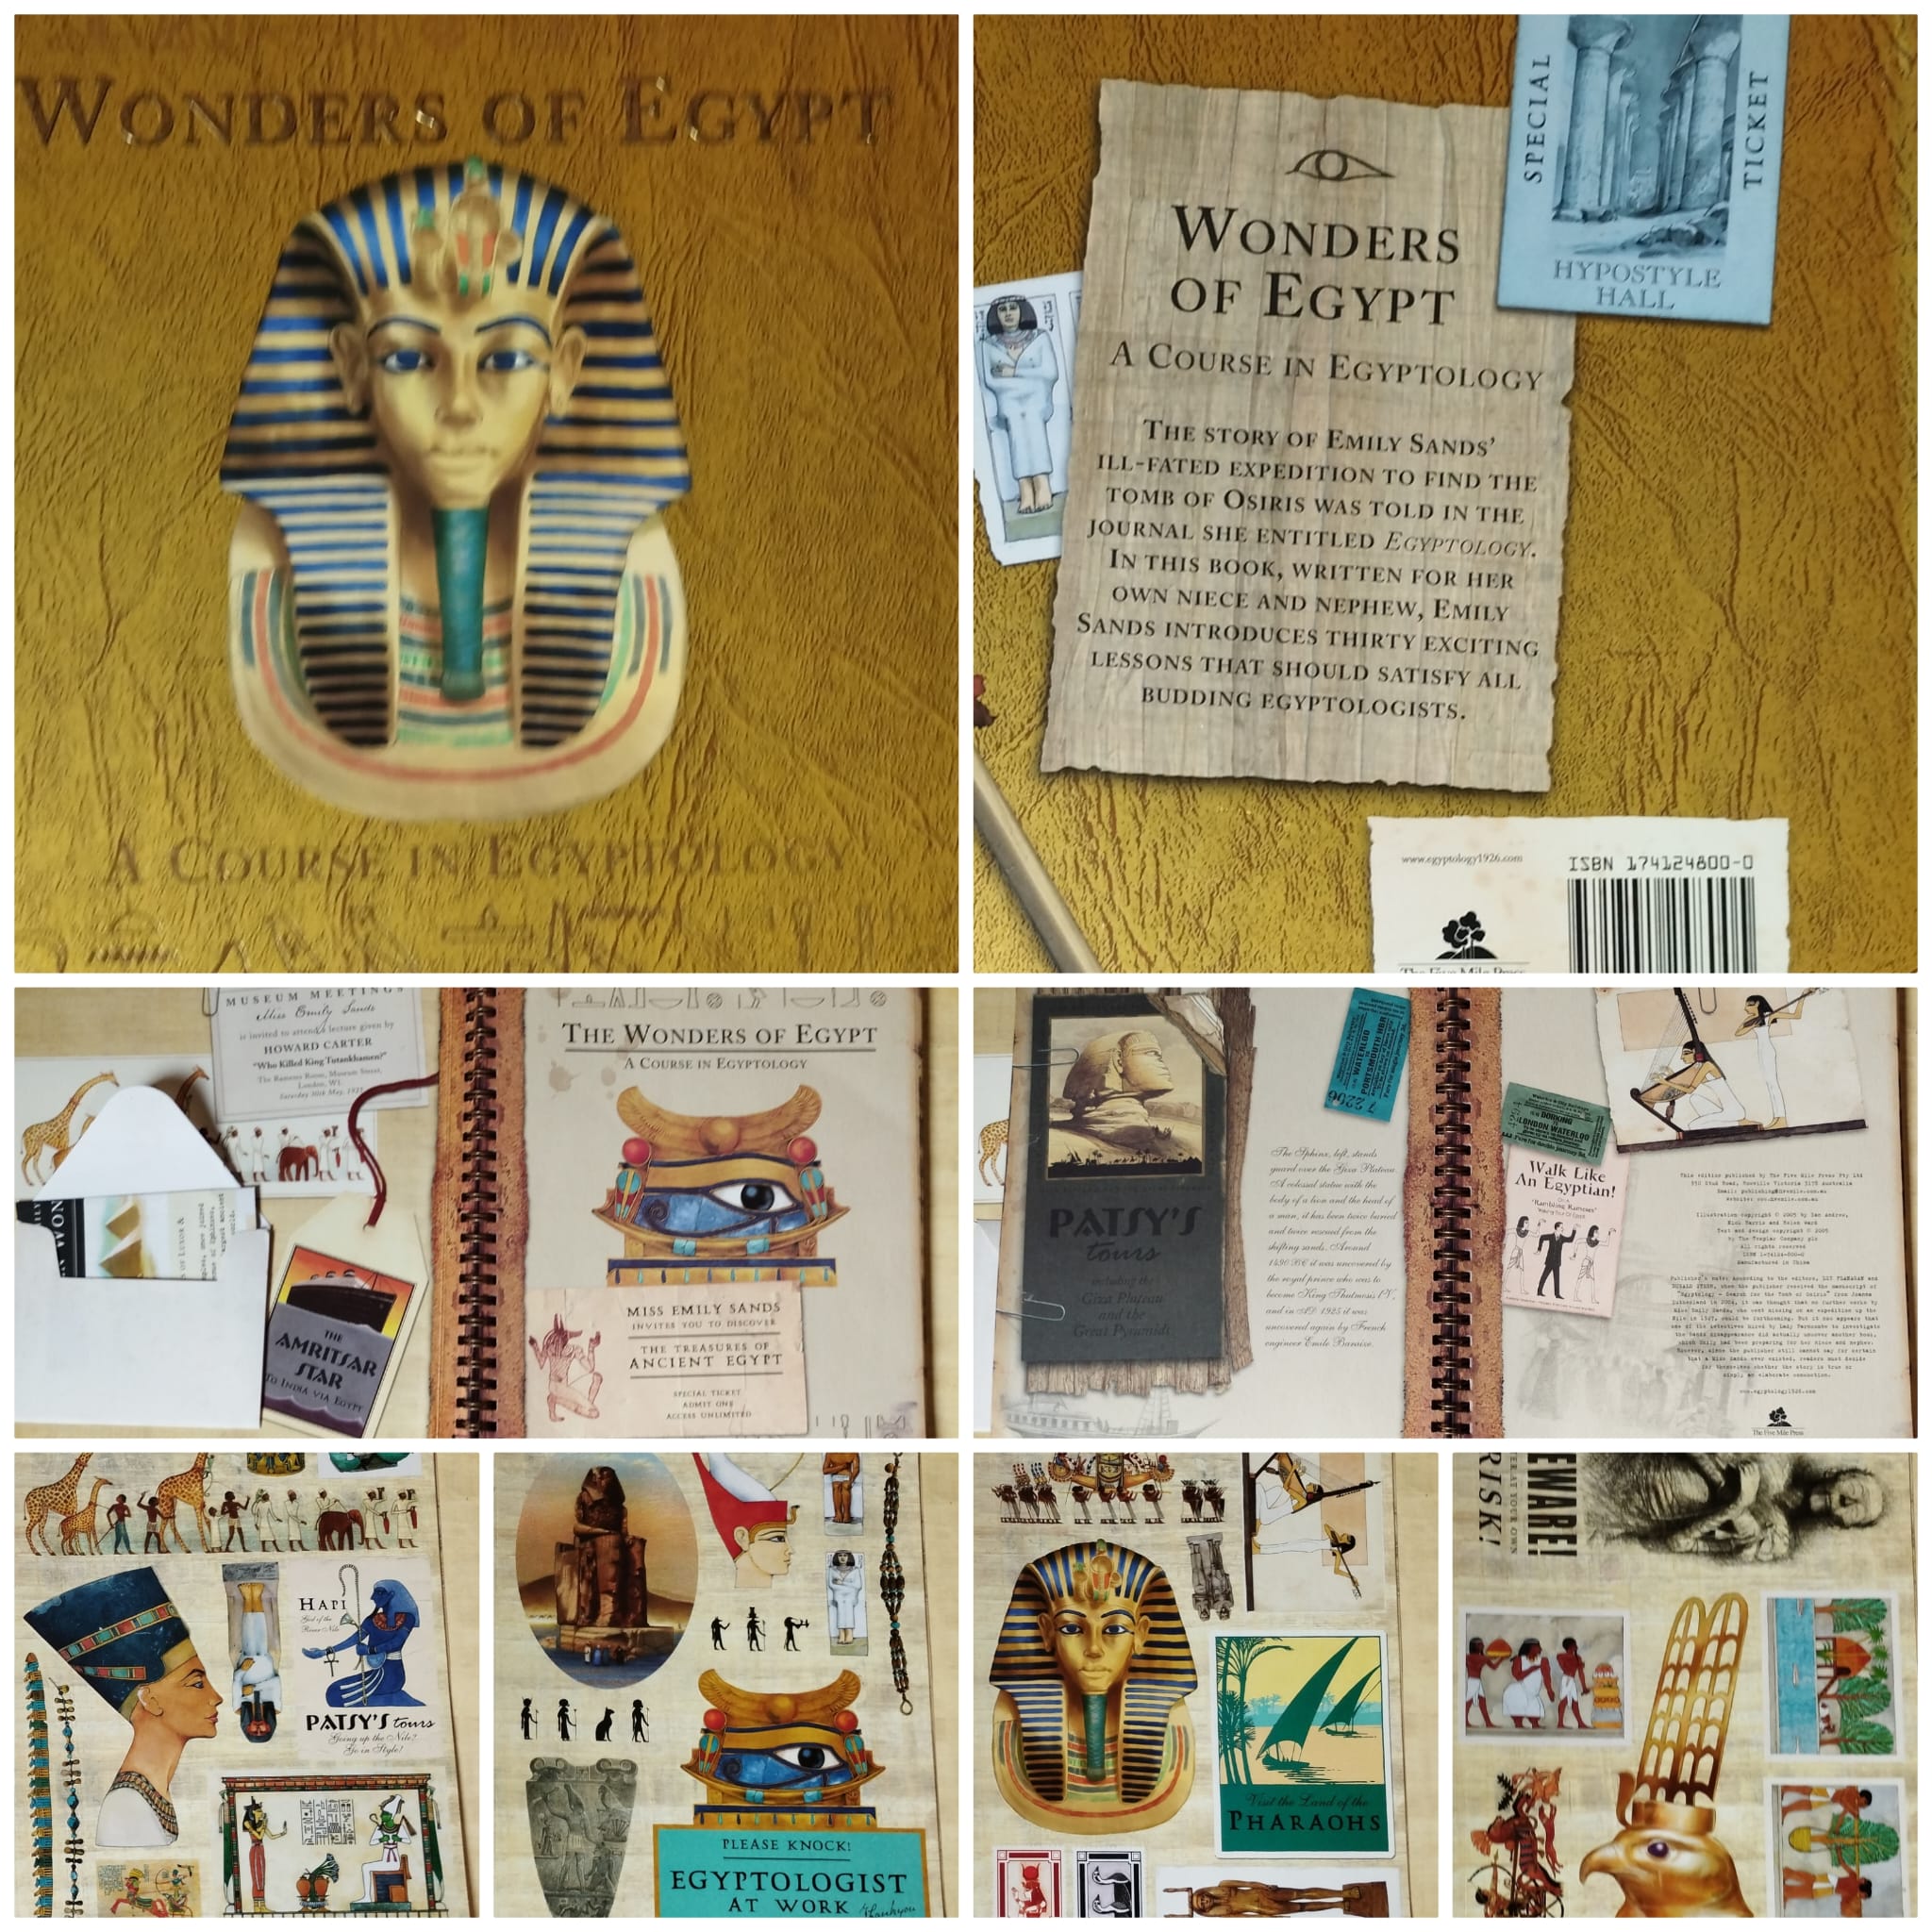 The Wonders of Egypt A Course in Egyptology Five Mile Press